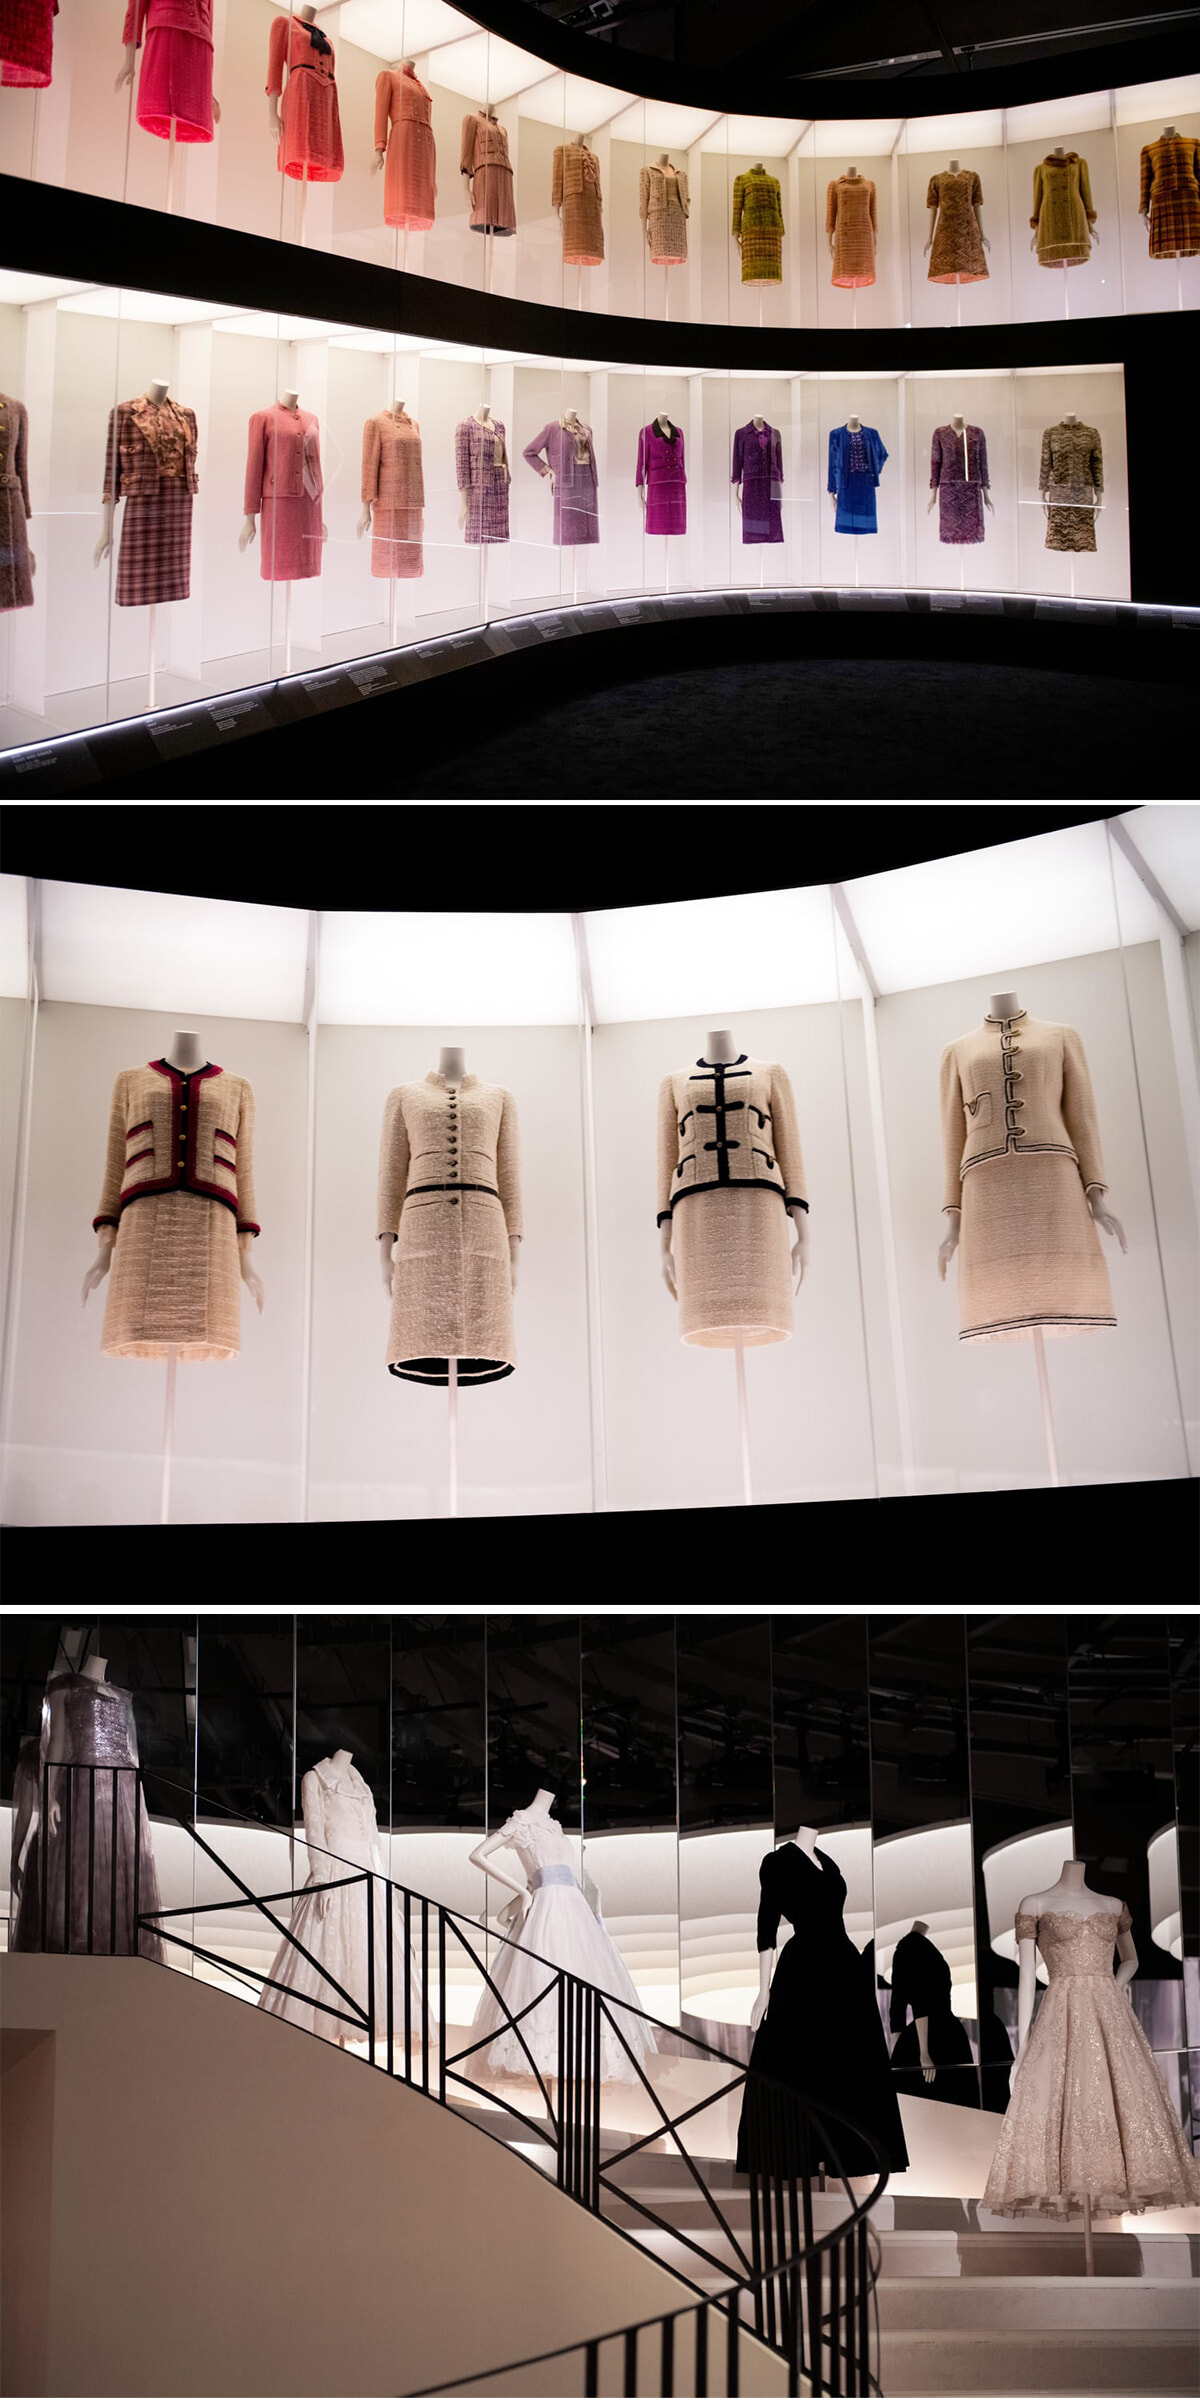 D_chanel_gabrielle-chanel-fashion-manifesto-at-the-victoria-and-albert-museum_copyright-chanel-13-LD.jpg